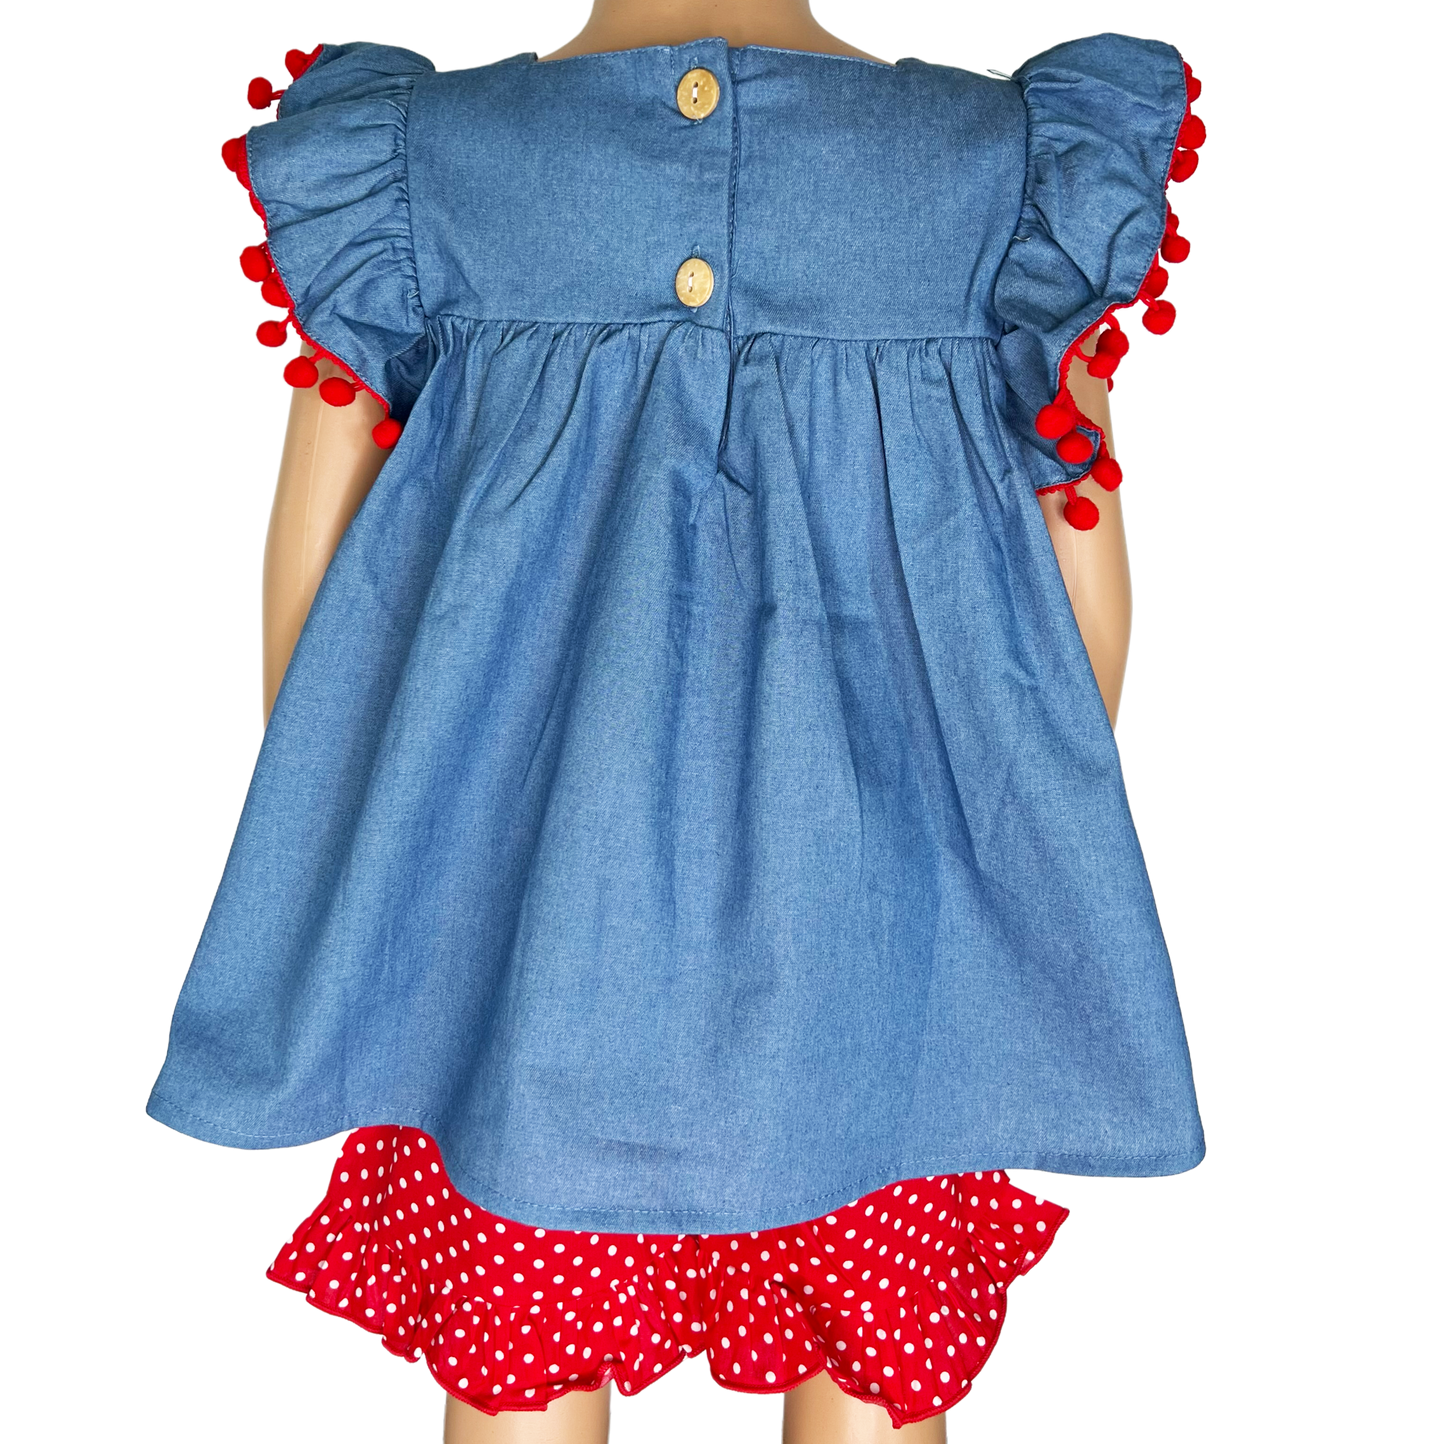 Girls Blue Chambray Apple top with Red polka Dot Ruffle Shorts Back to School